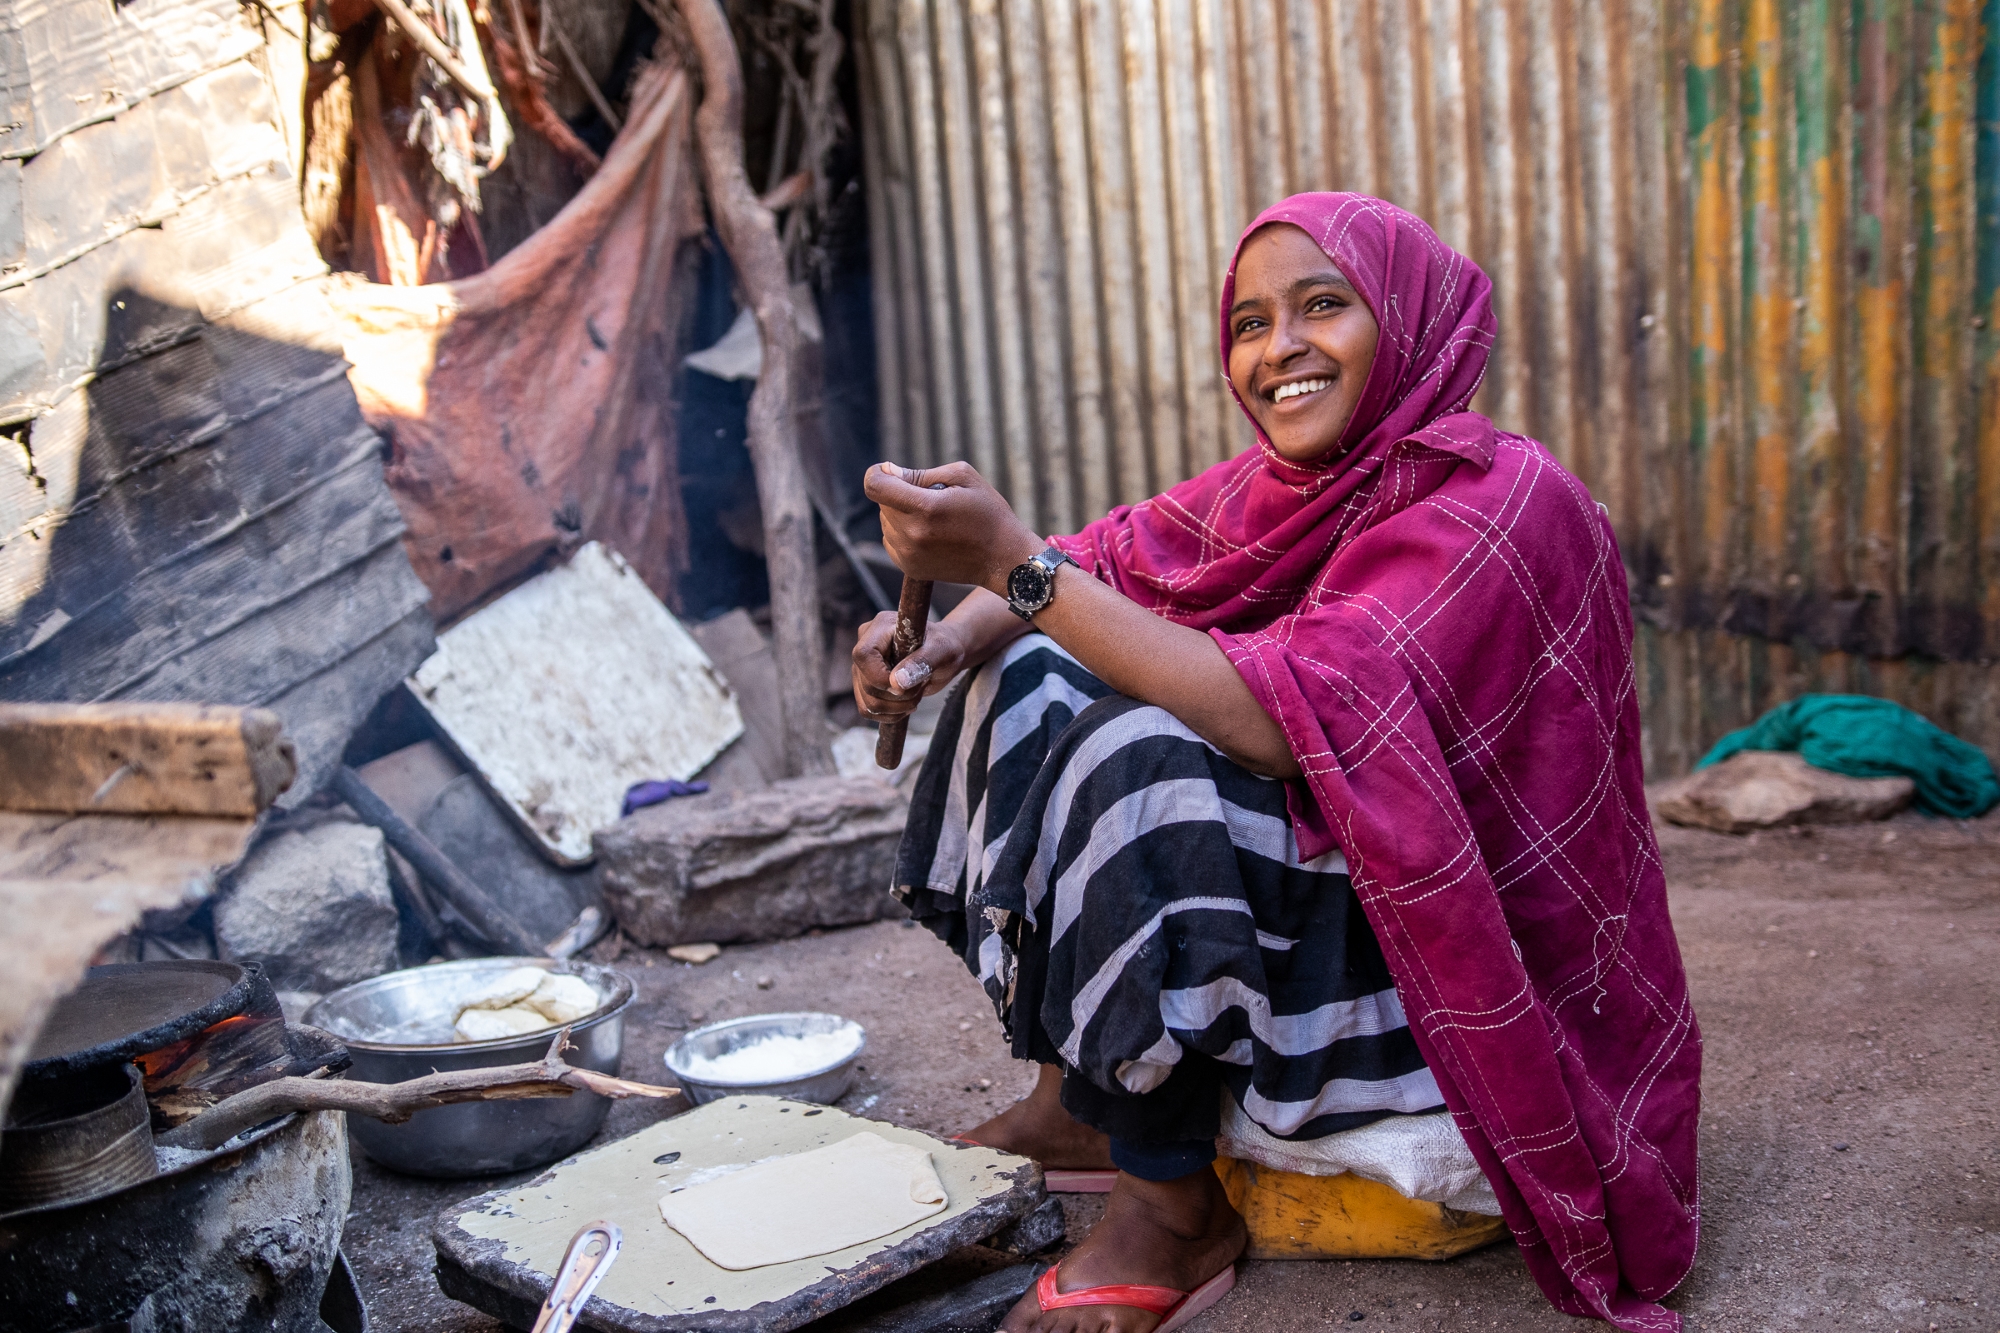 Saynab, a 14-year-old girl, has impacted by the drought in Somalia and sells chapatis to support her family. She smiles as she cooks chapatis.